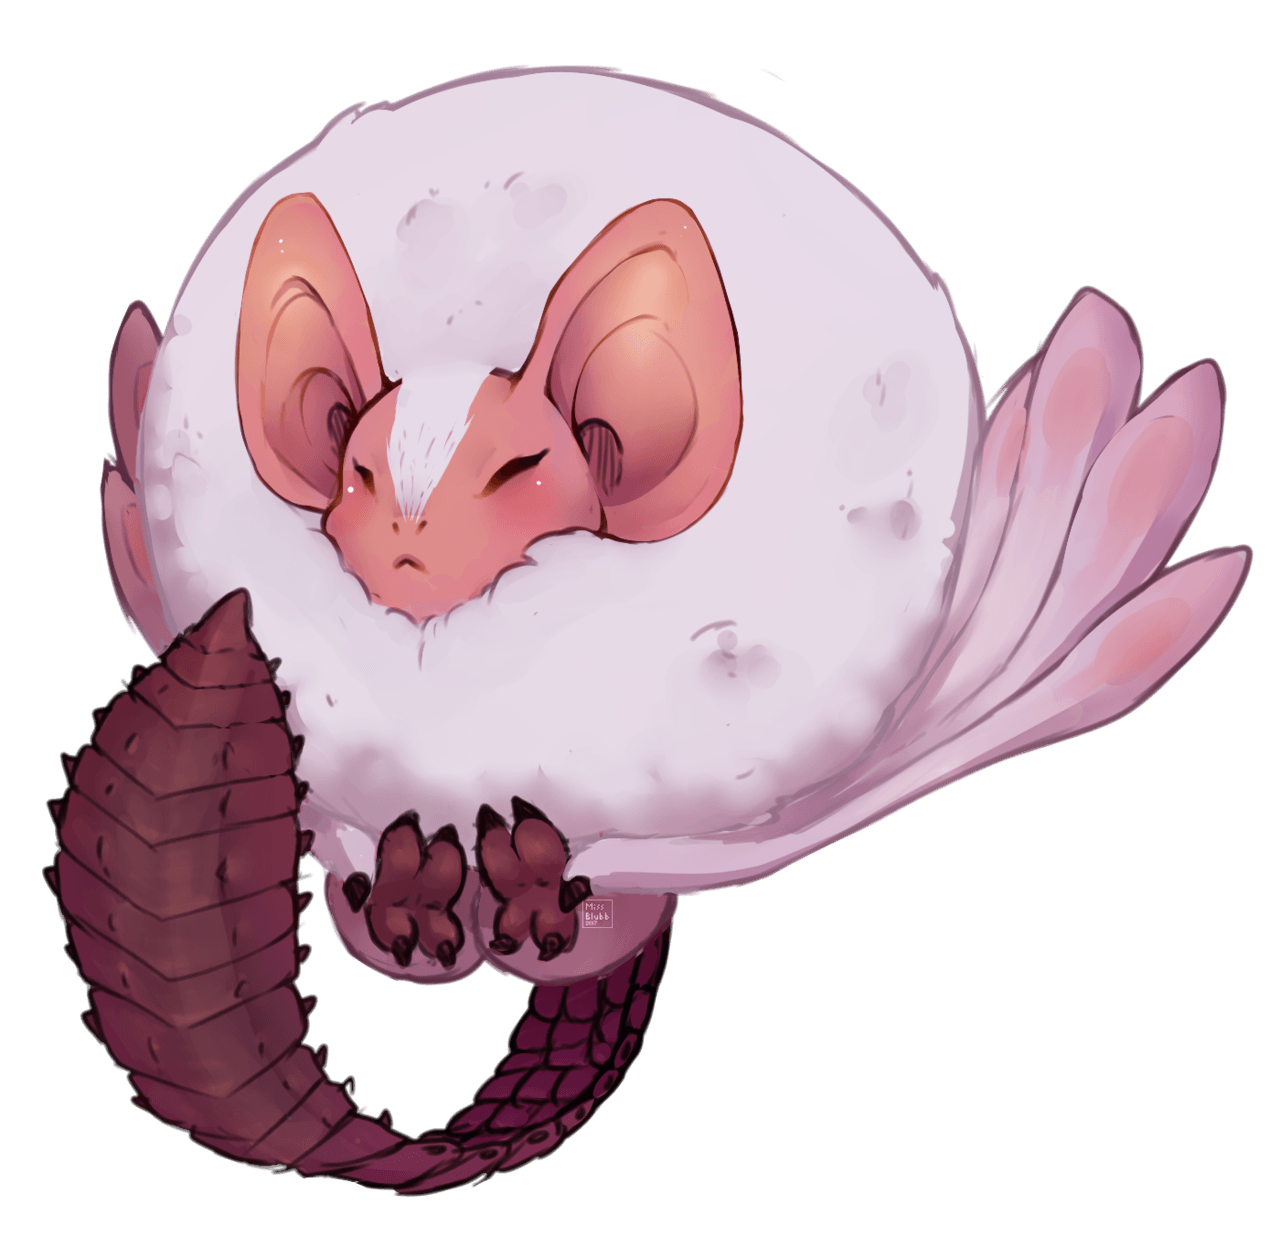 Paolumu are Flying Wyverns first introduced in Monster Hunter: World